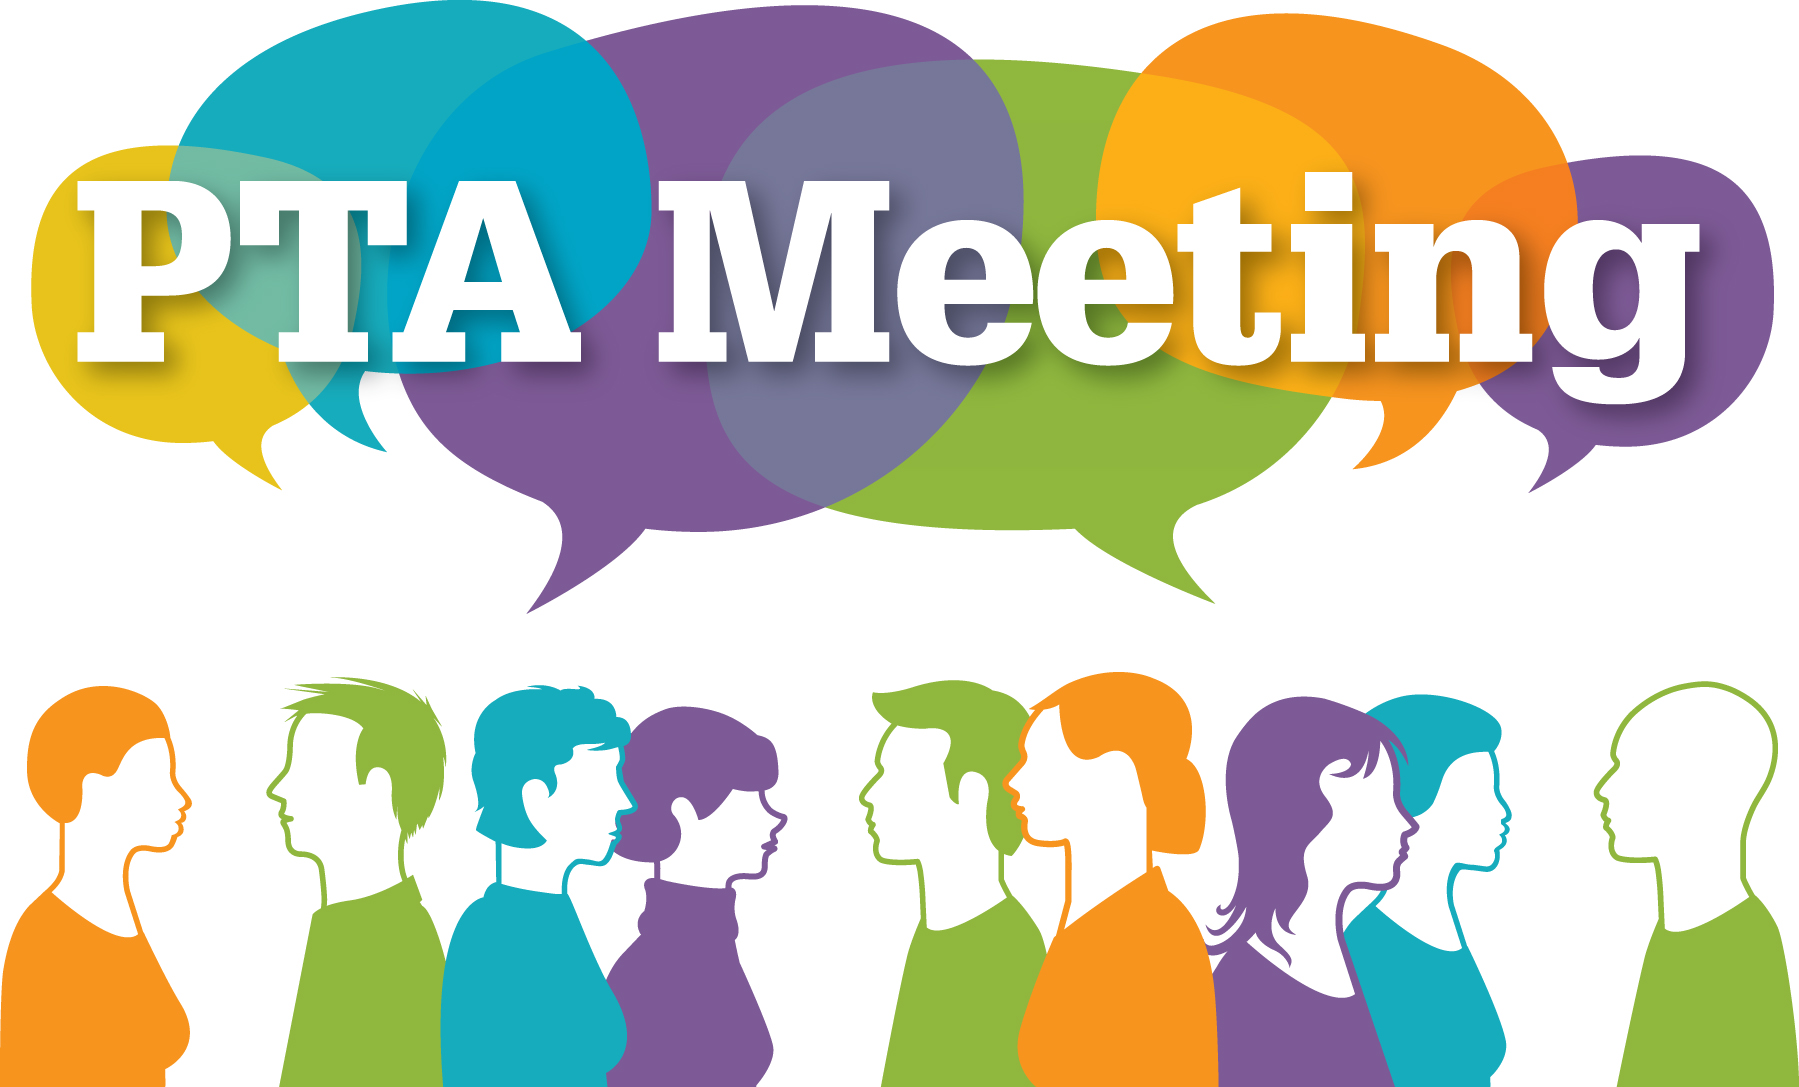 May 15th – last PTA Meeting of the year